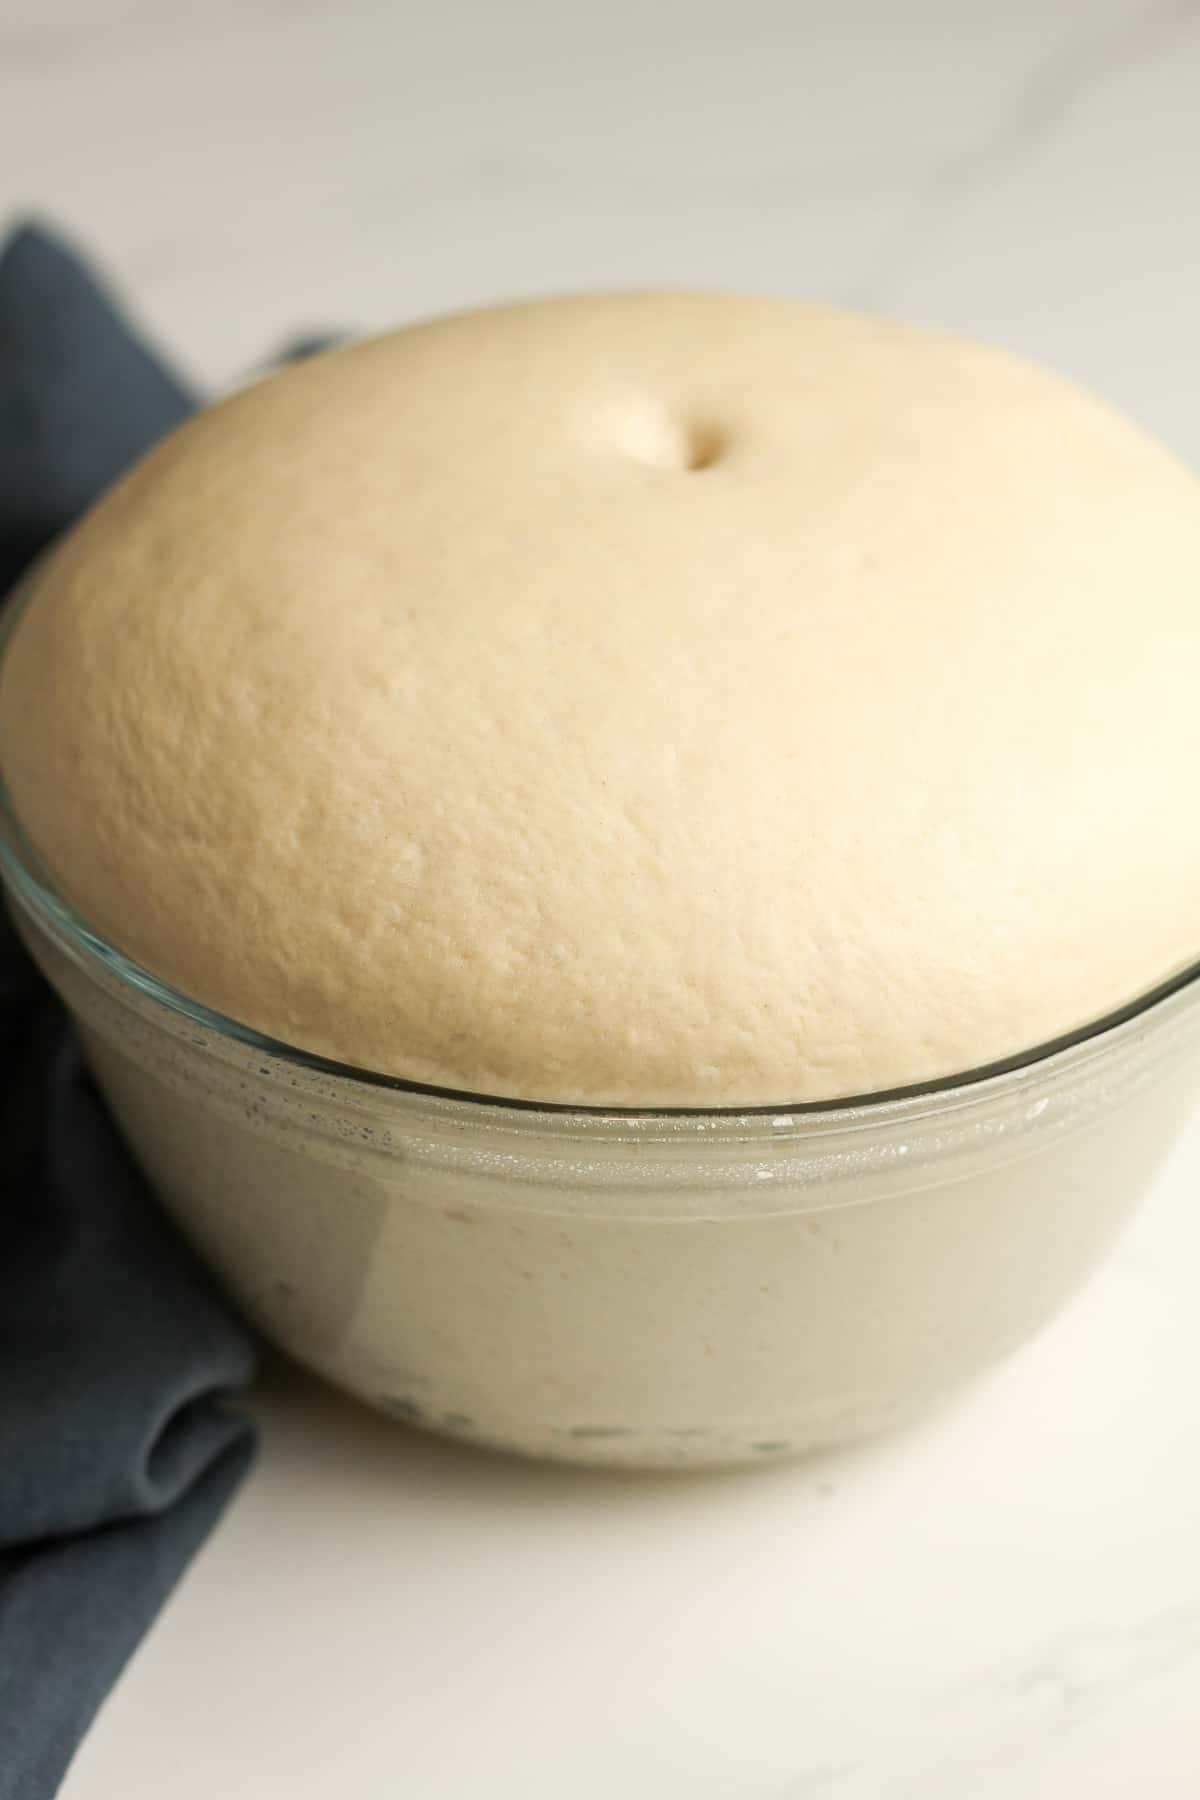 Side shot of the dough after raising.